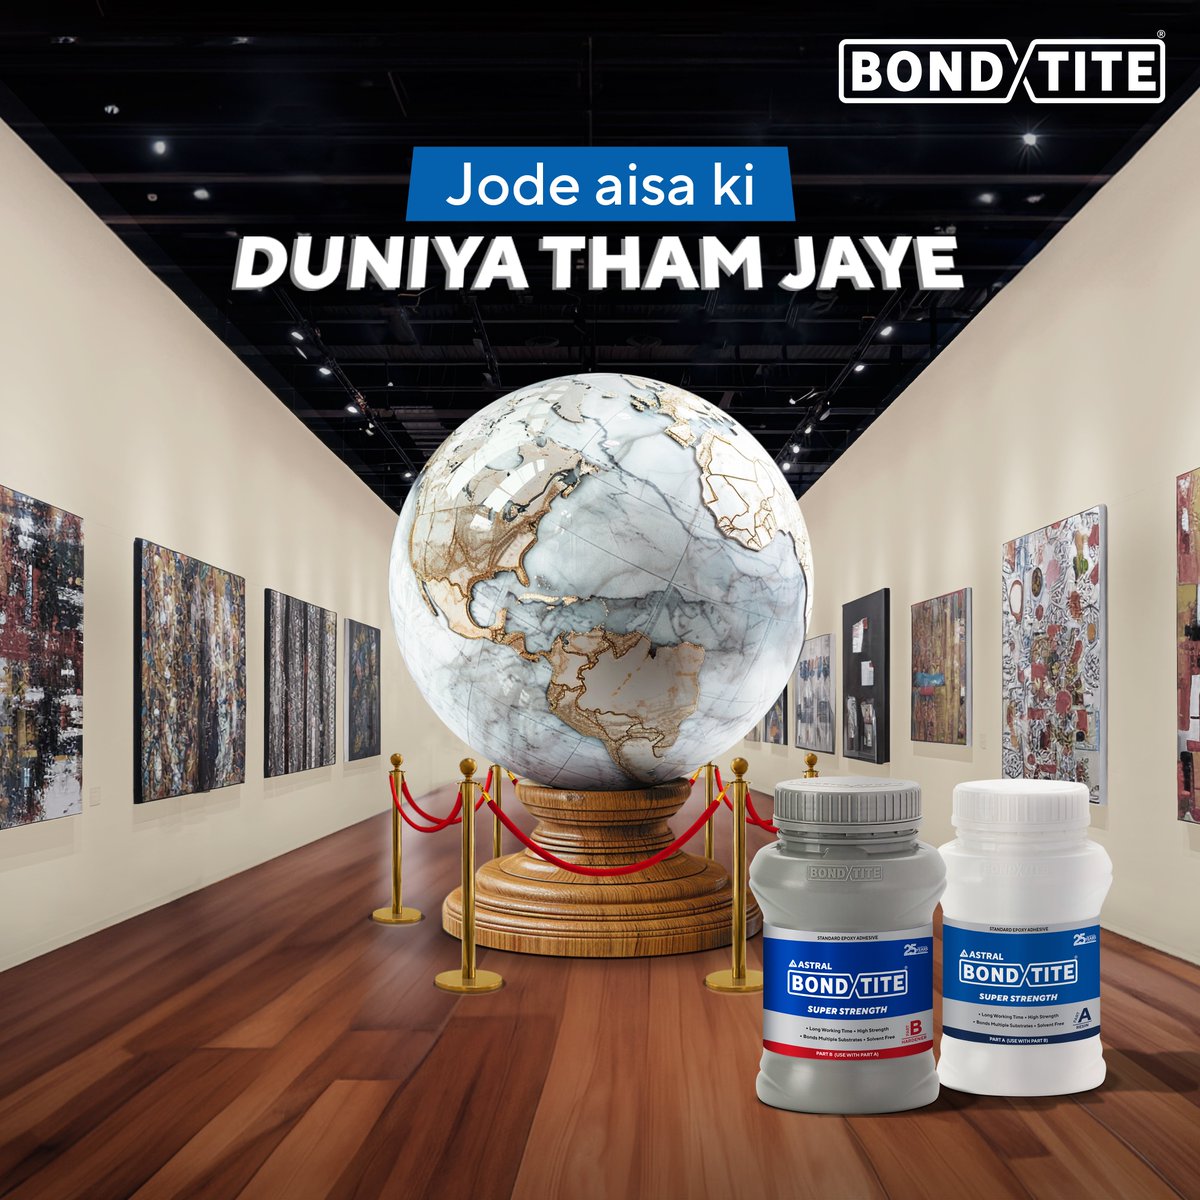 It's one of the world's strongest bonds for a reason :)

#Astral #AstralAdhesives #Adhesives #Bondtite #JodeEkdumTight #EpoxyAdhesives #SuperStrength